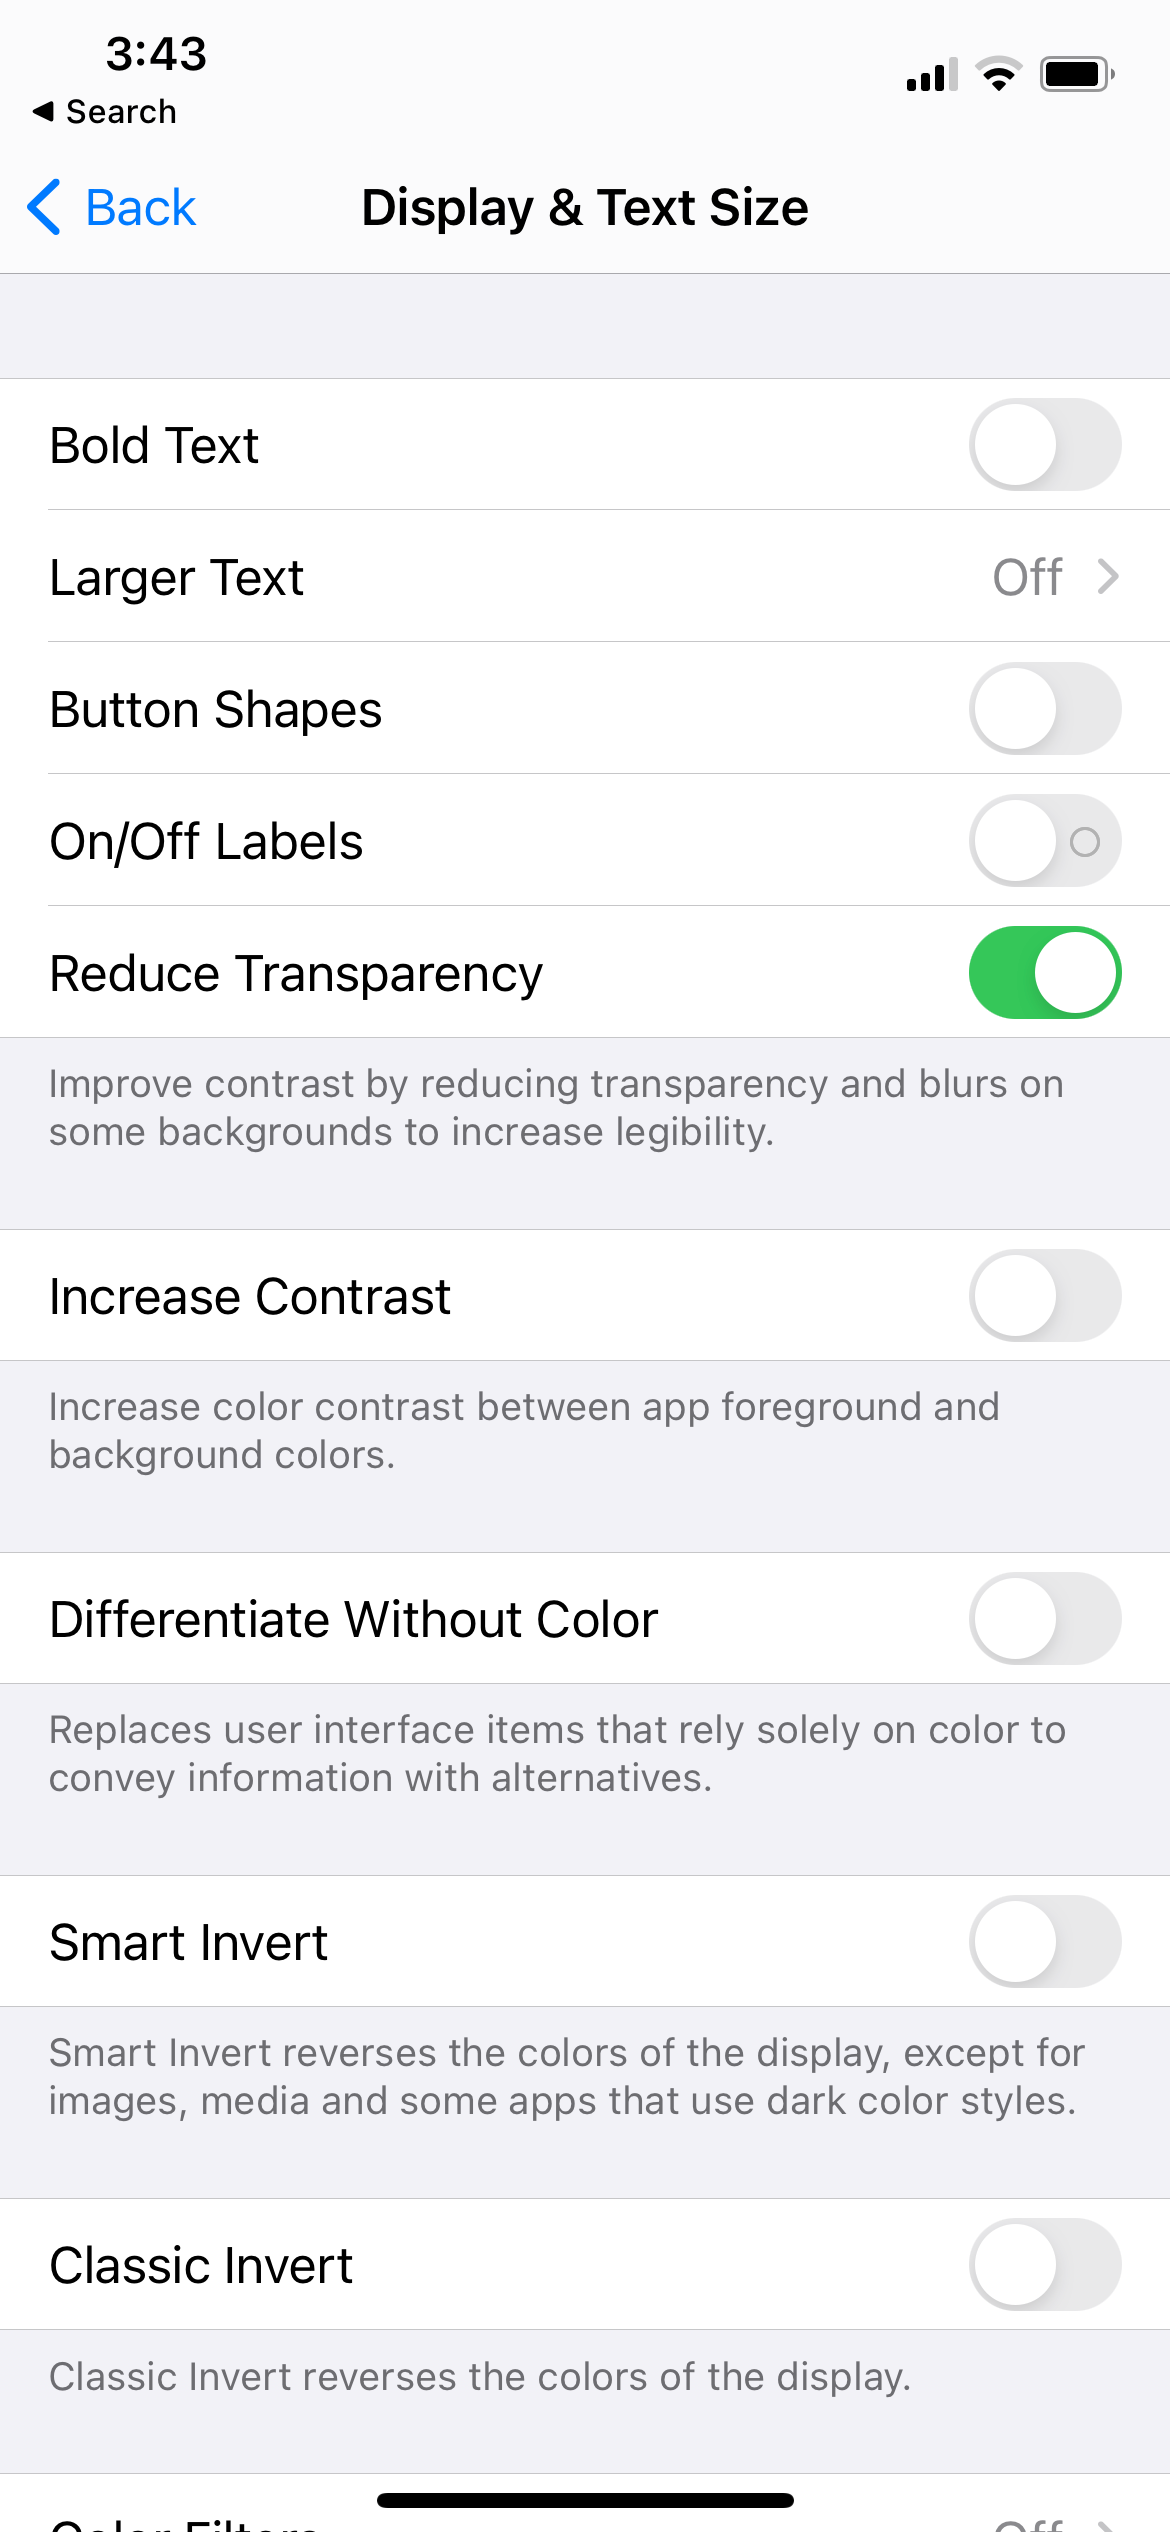 Reduce Transparency option enabled in iPhone settings.